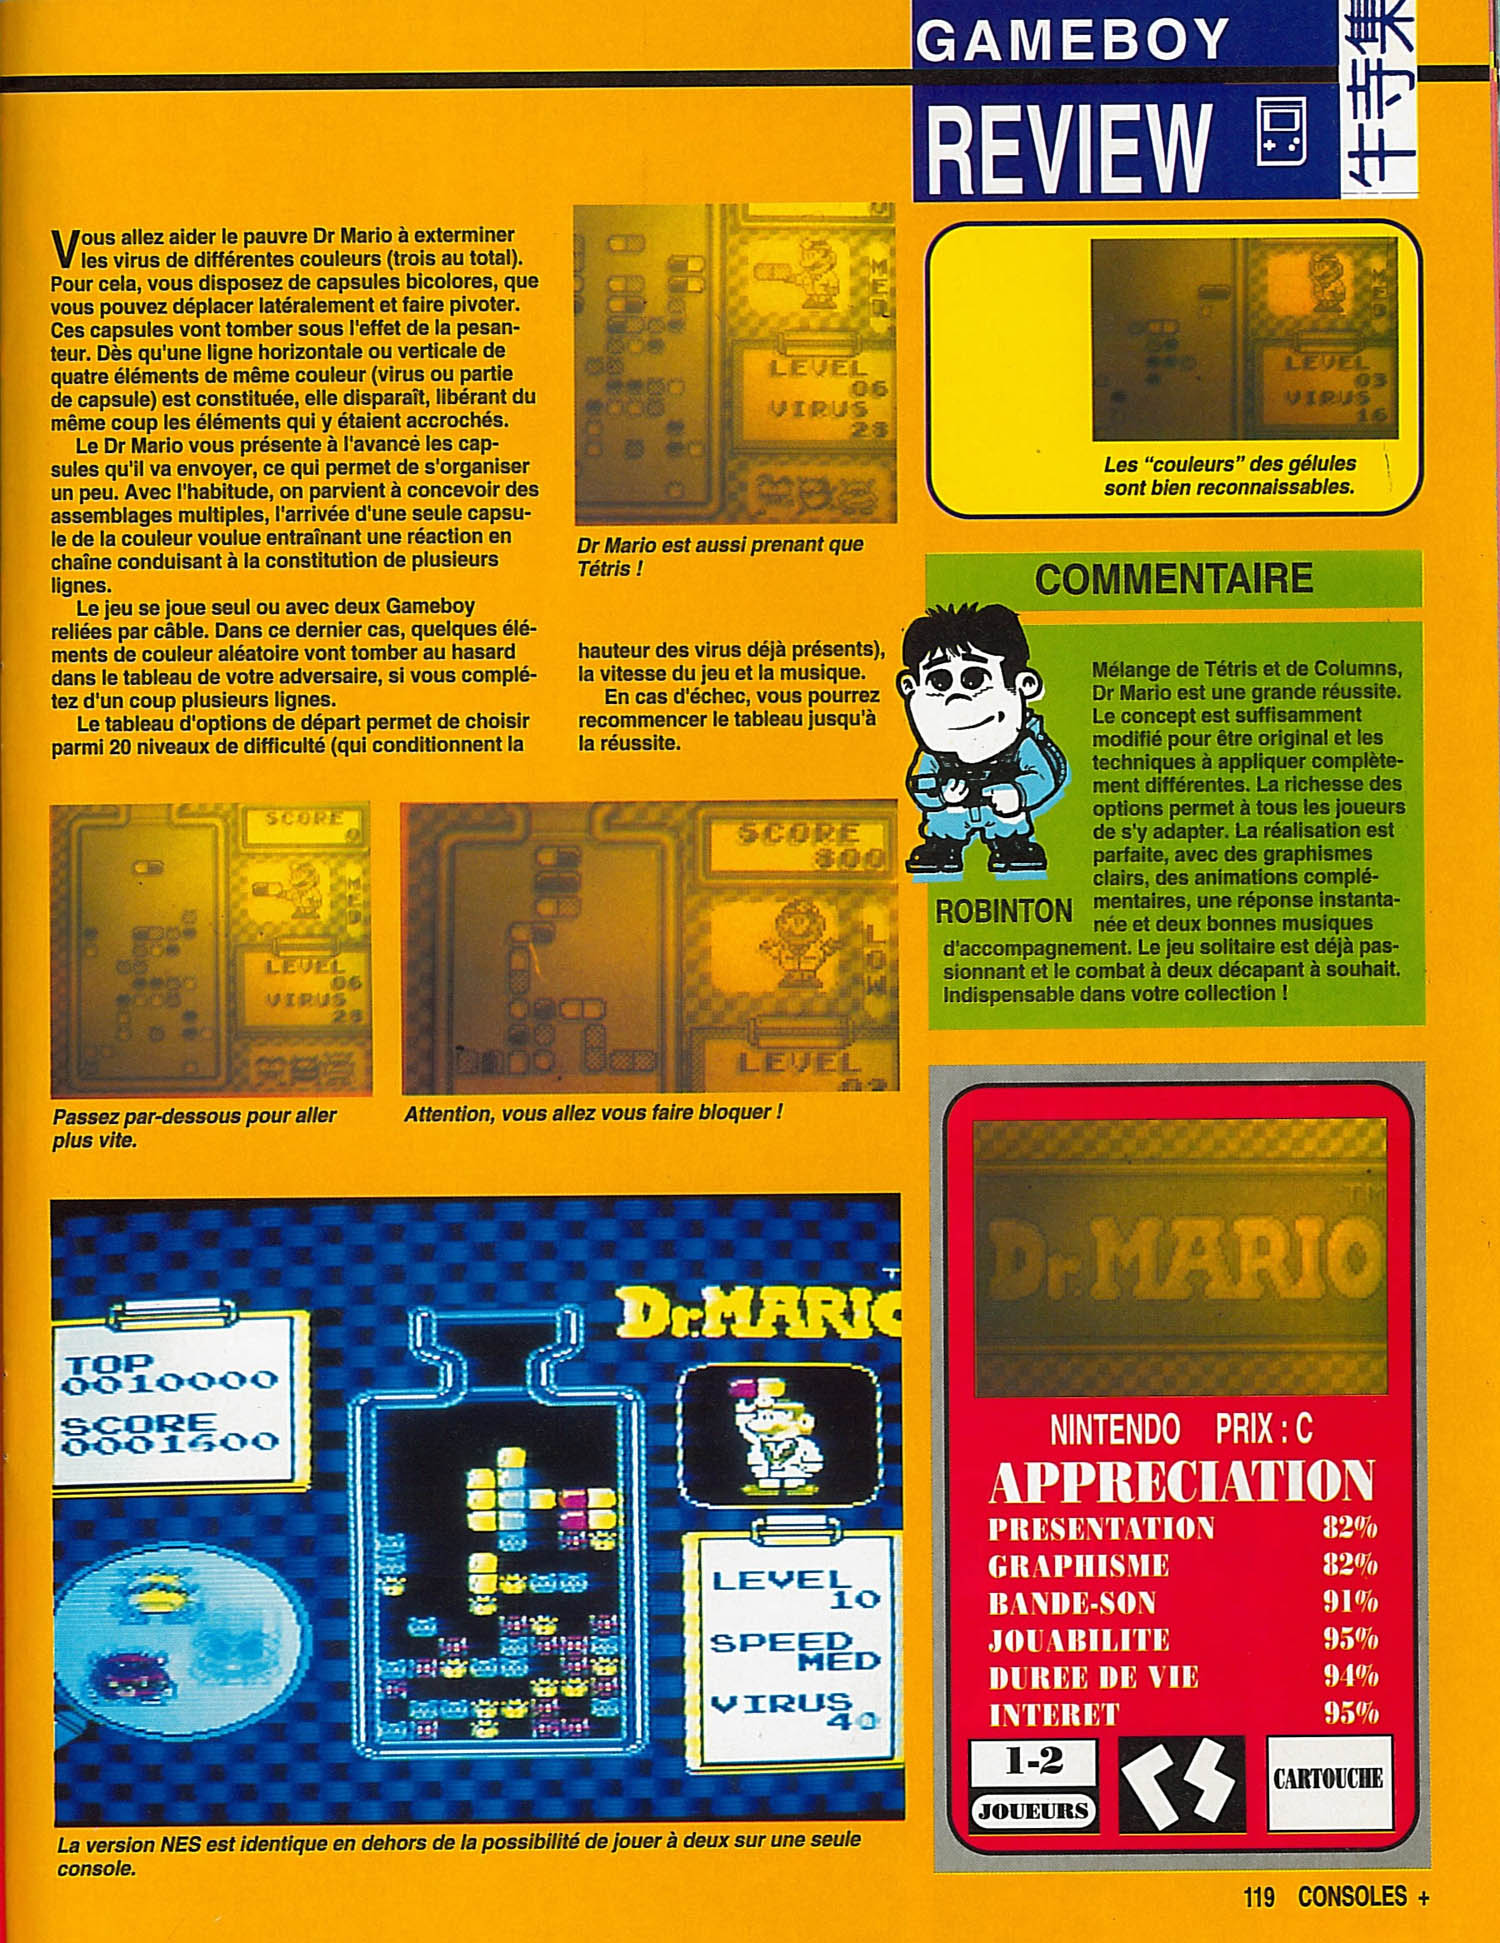 tests/1328/Consoles + 001 - Page 119 (septembre 1991).jpg